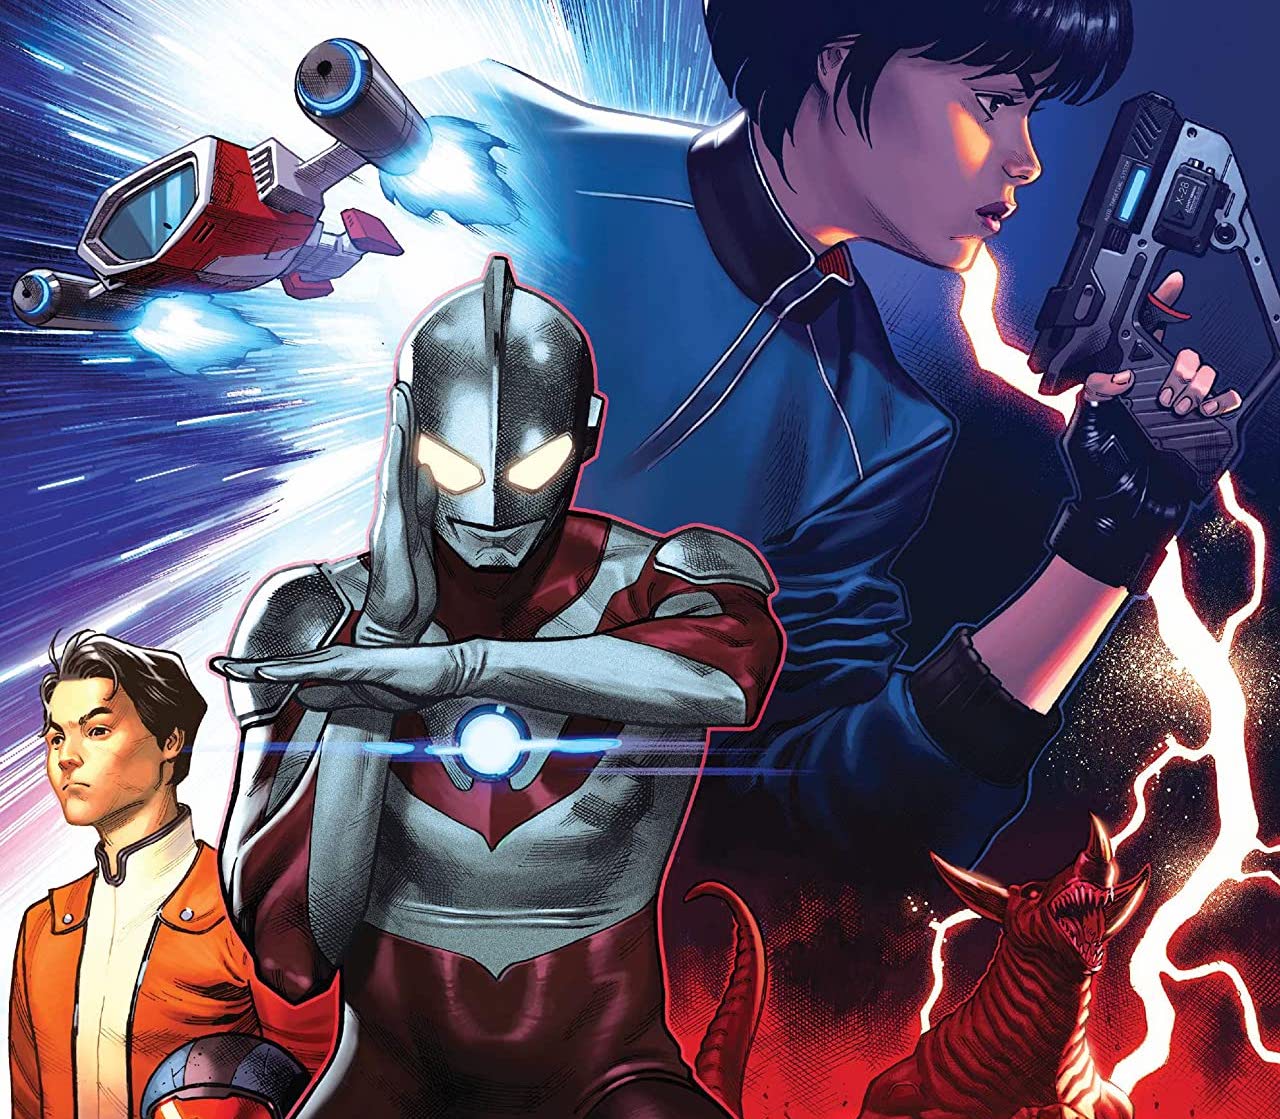 EXCLUSIVE Marvel Preview: The Rise Of Ultraman #2